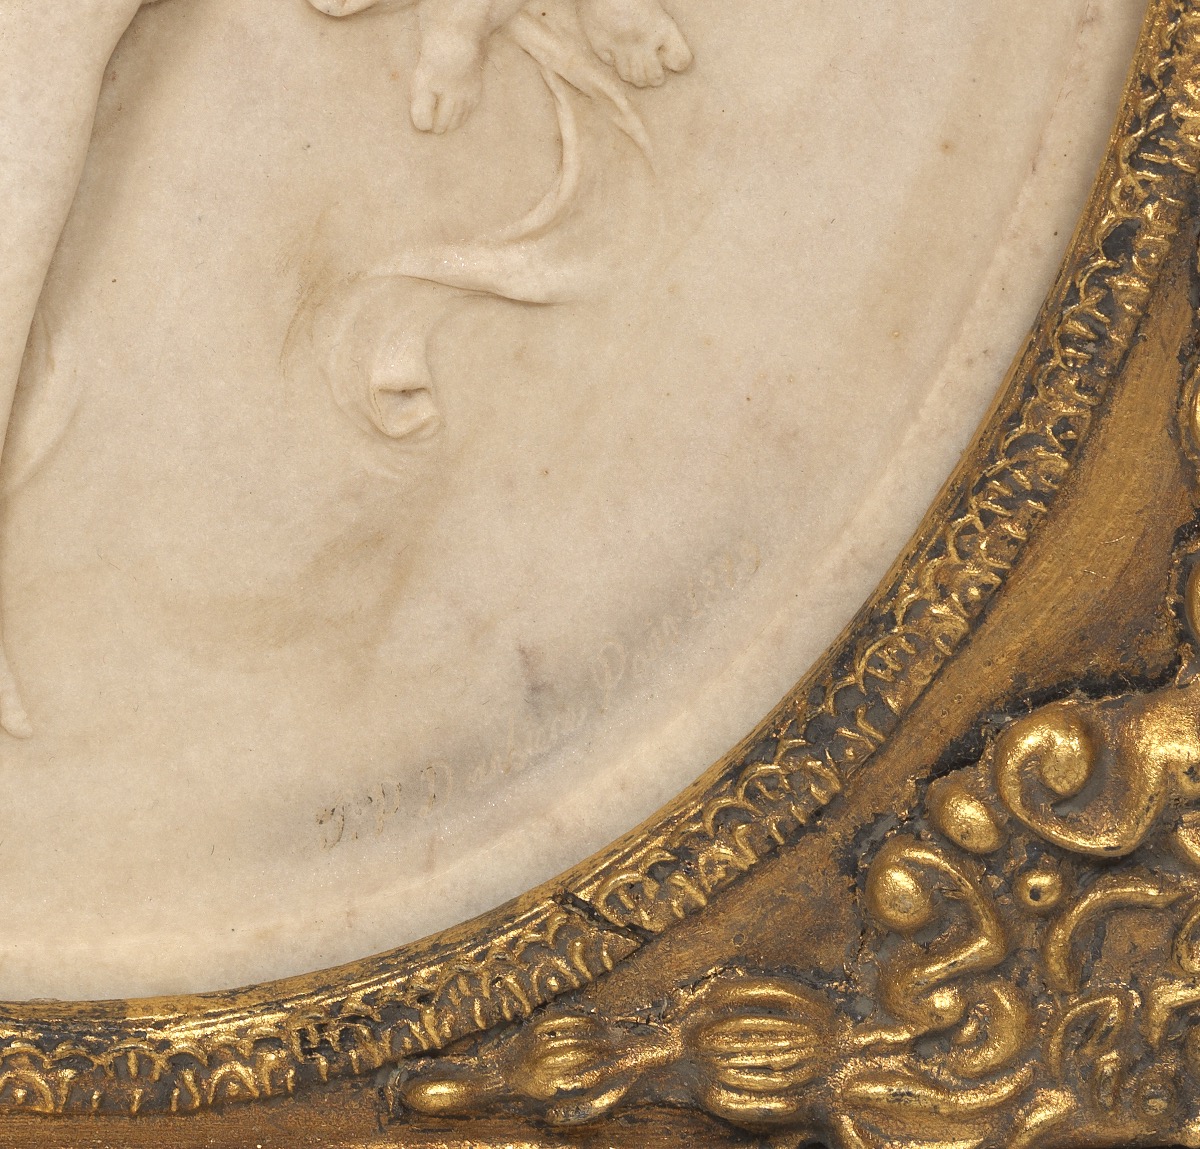 Two French Stone Cameo Oval Plaques in Fancy Frames, T.P. Danbiene Paris 1889 - Image 3 of 8